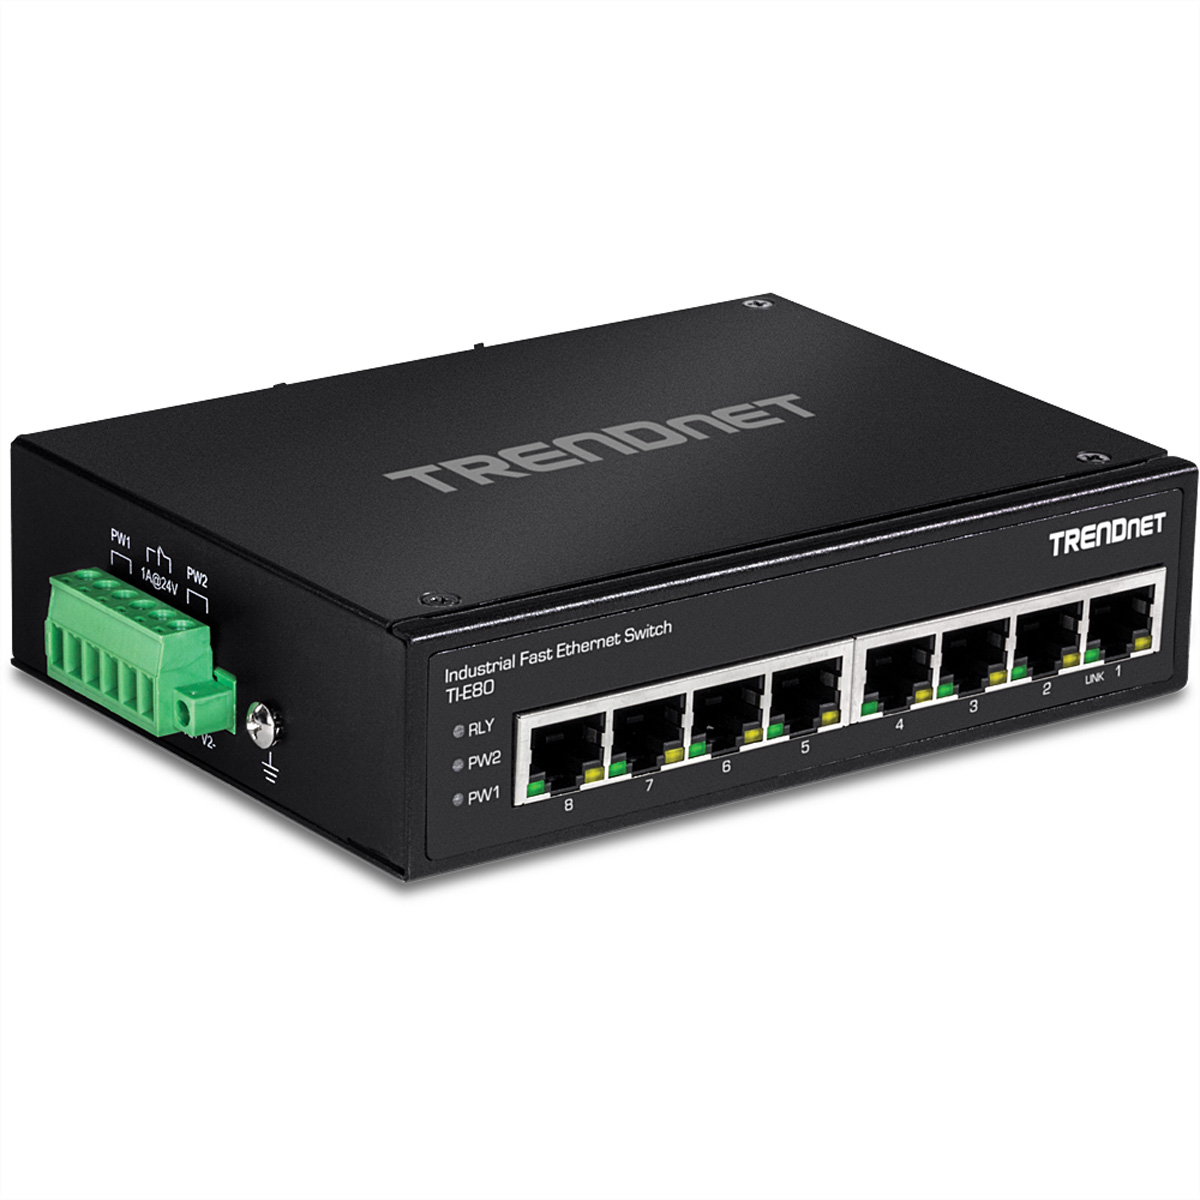 Industrial Industrial 8-Port Networking Ethernet Fast DIN-Rail Switch TRENDNET TI-E80